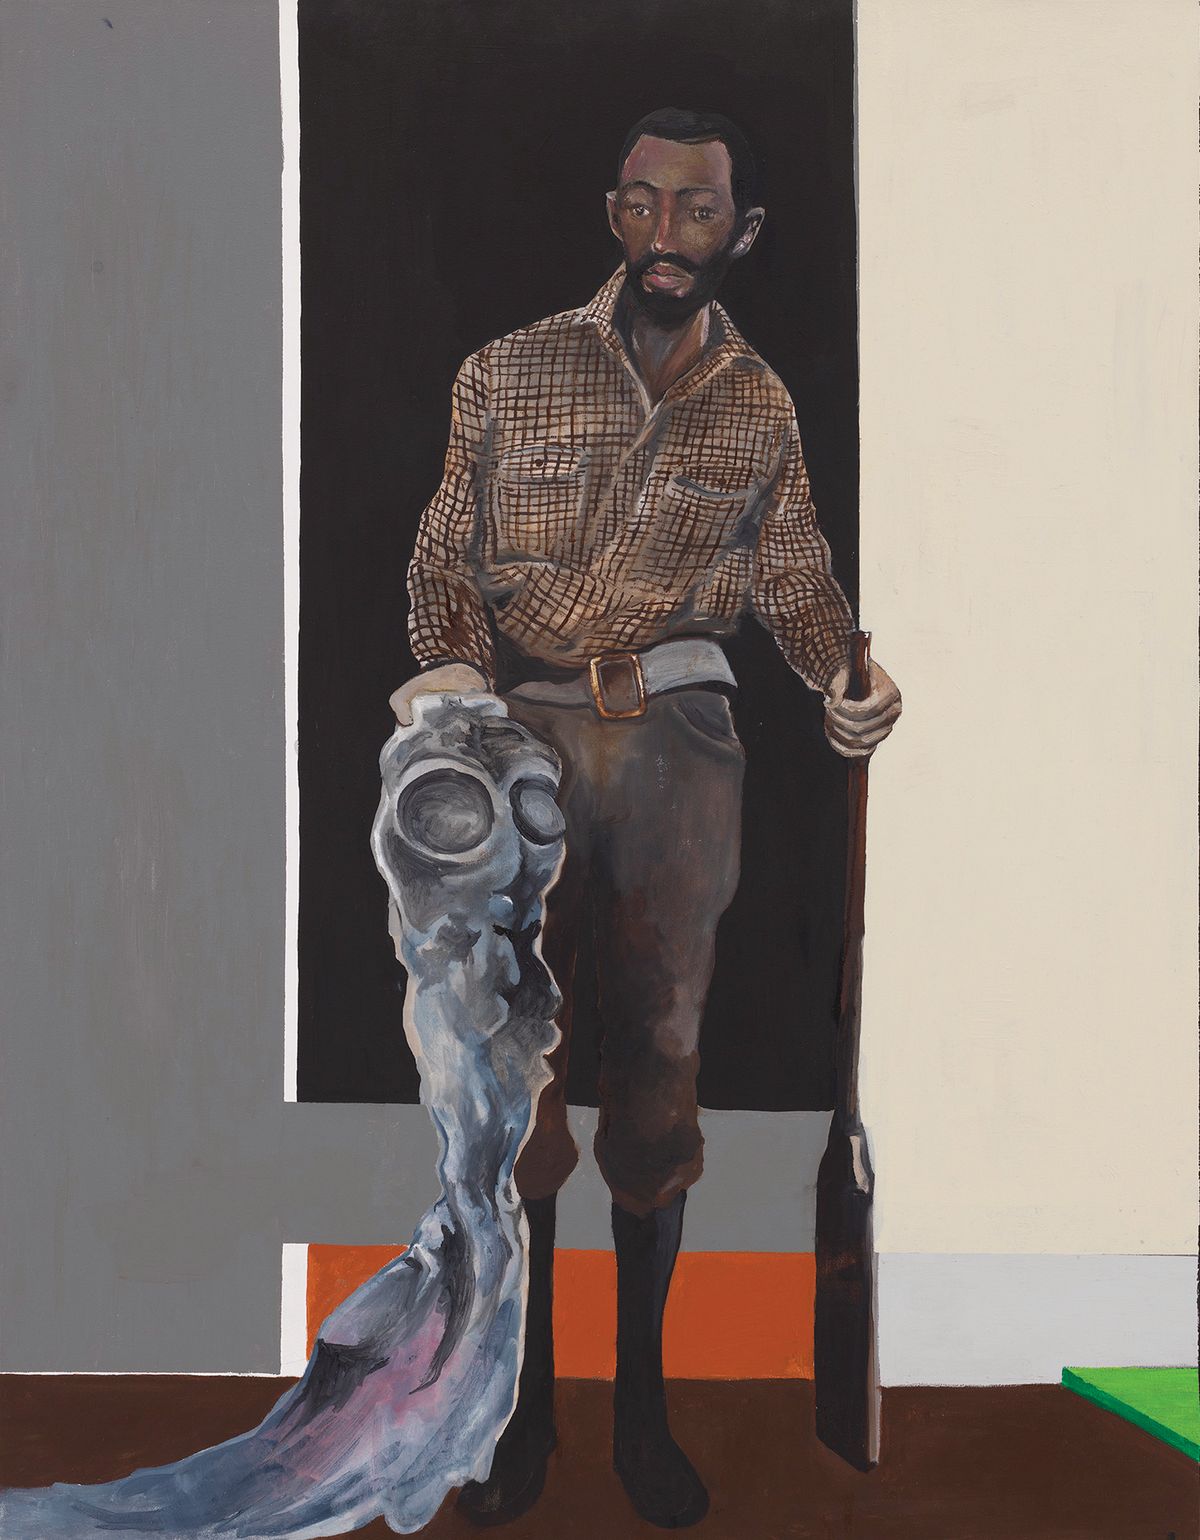 Man with Alien and Shotgun (2008) is one of the more surrealist-style paintings in a travelling exhibition of works by the late artist that is now on view at the museum he co-founded with his wife


Courtesy of David Zwirner


